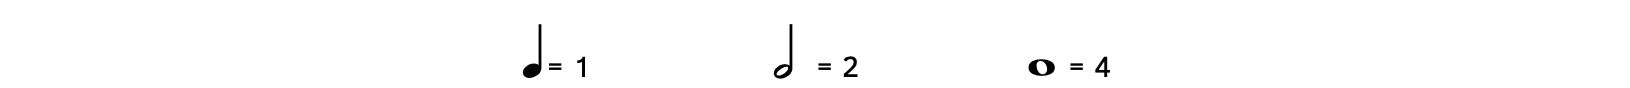 Note values are shown for notes without dots. If a quarter note equals 1, a half note equals 2 and a whole note equals 4.